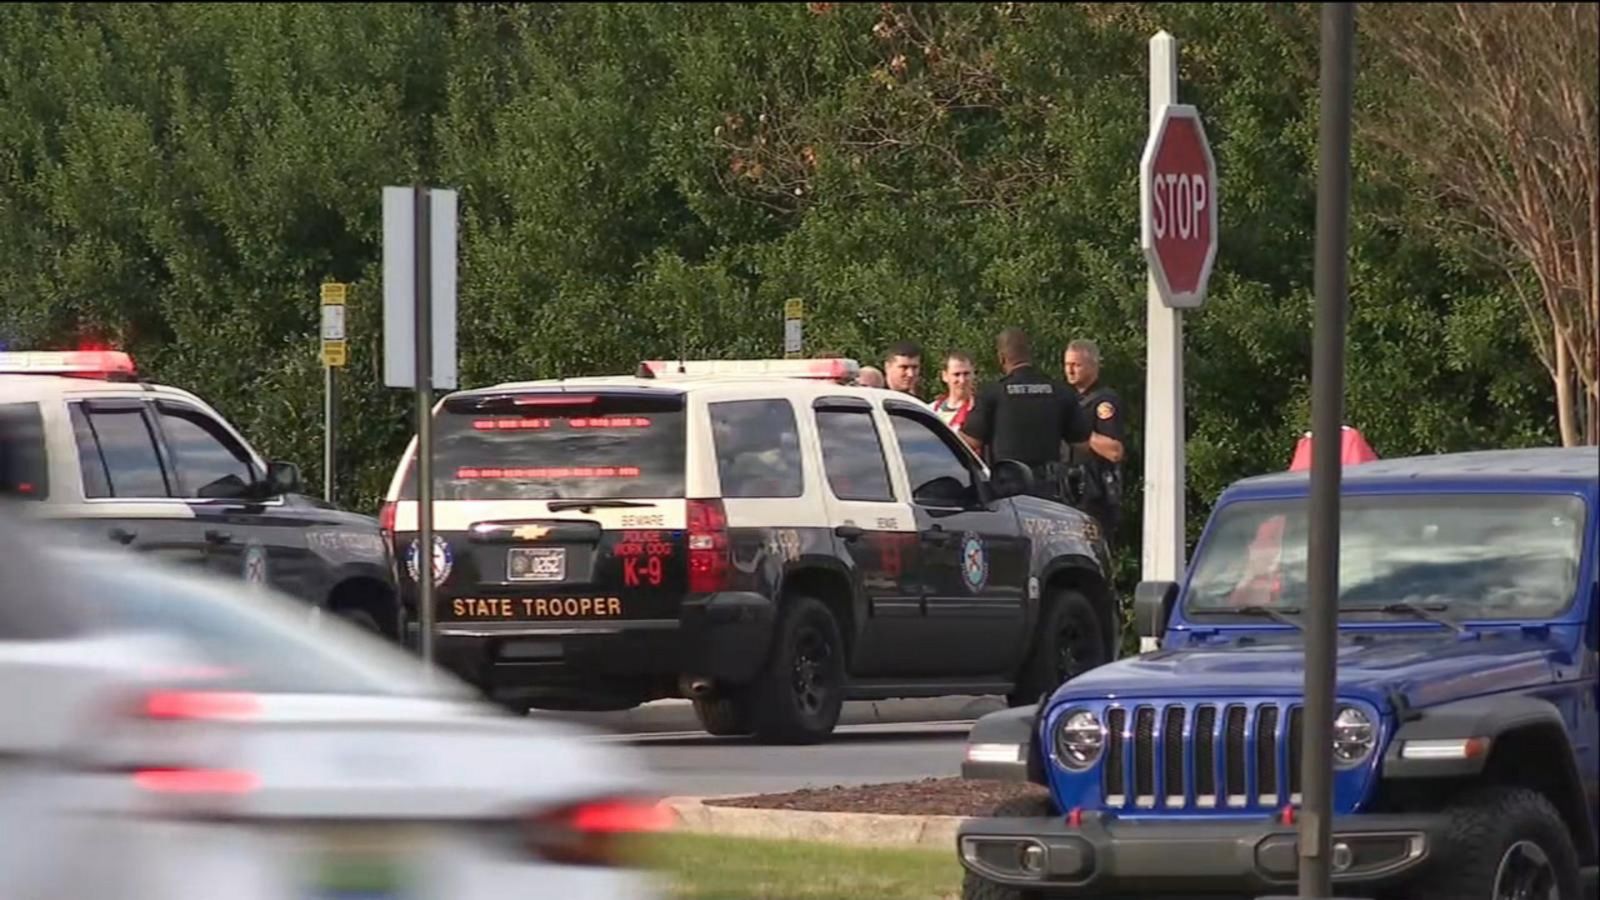 2 dead including suspect in shooting at Pensacola naval base, police ...